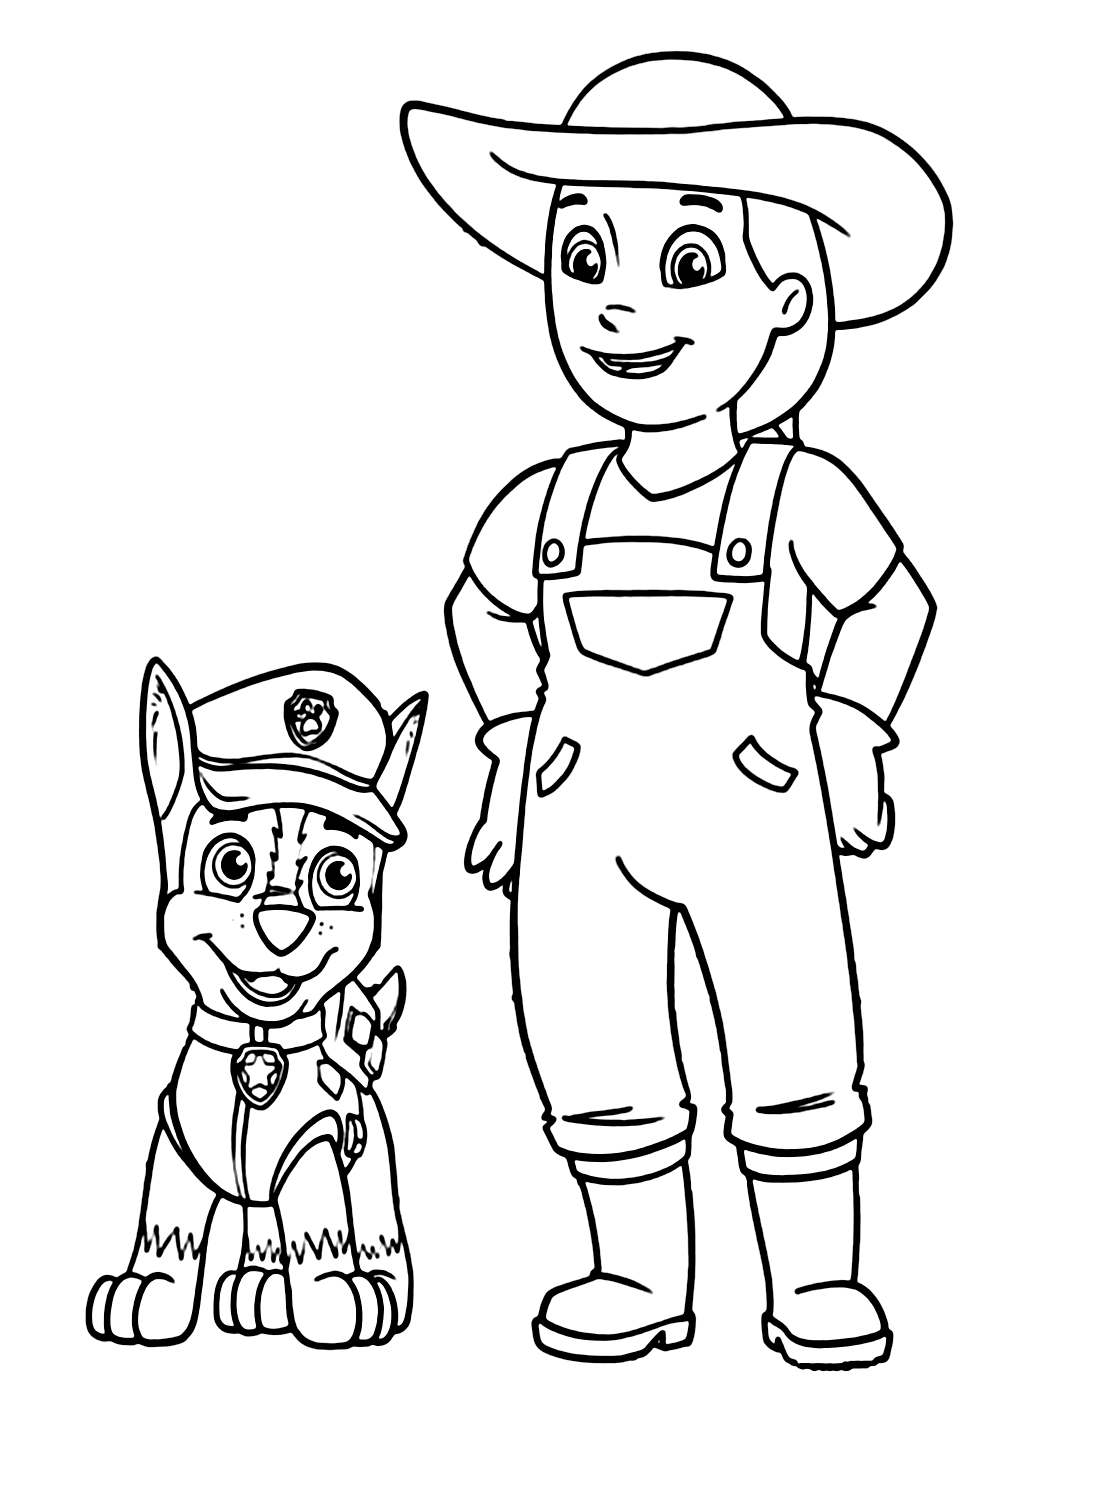 Farmer Yumi with Chase Paw Patrol Coloring Pages